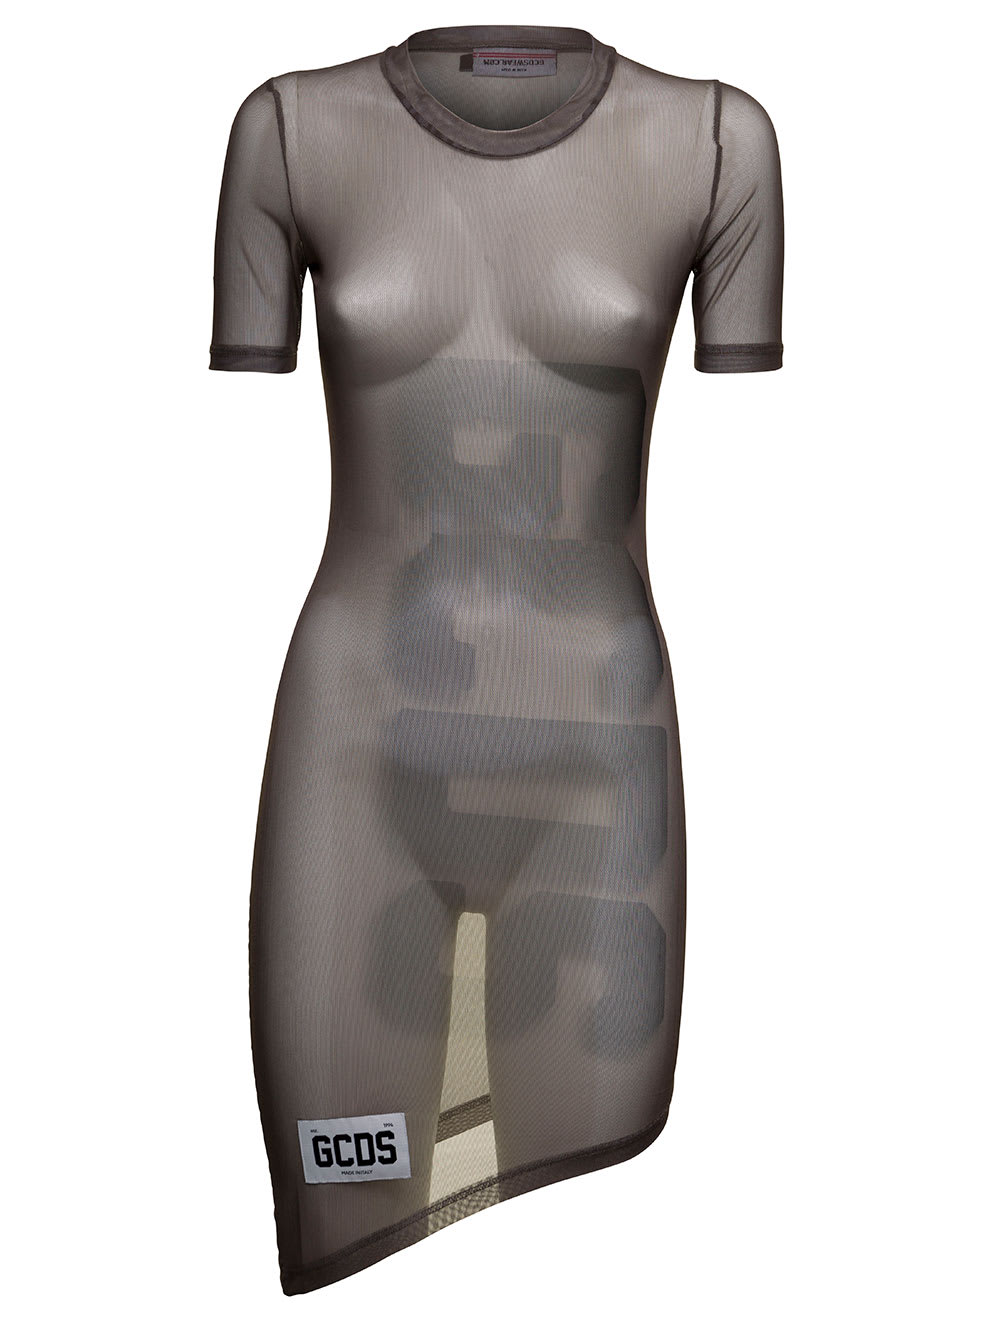 Asymmetrical Transparent Knitted Dress With Gcds Woman Logo